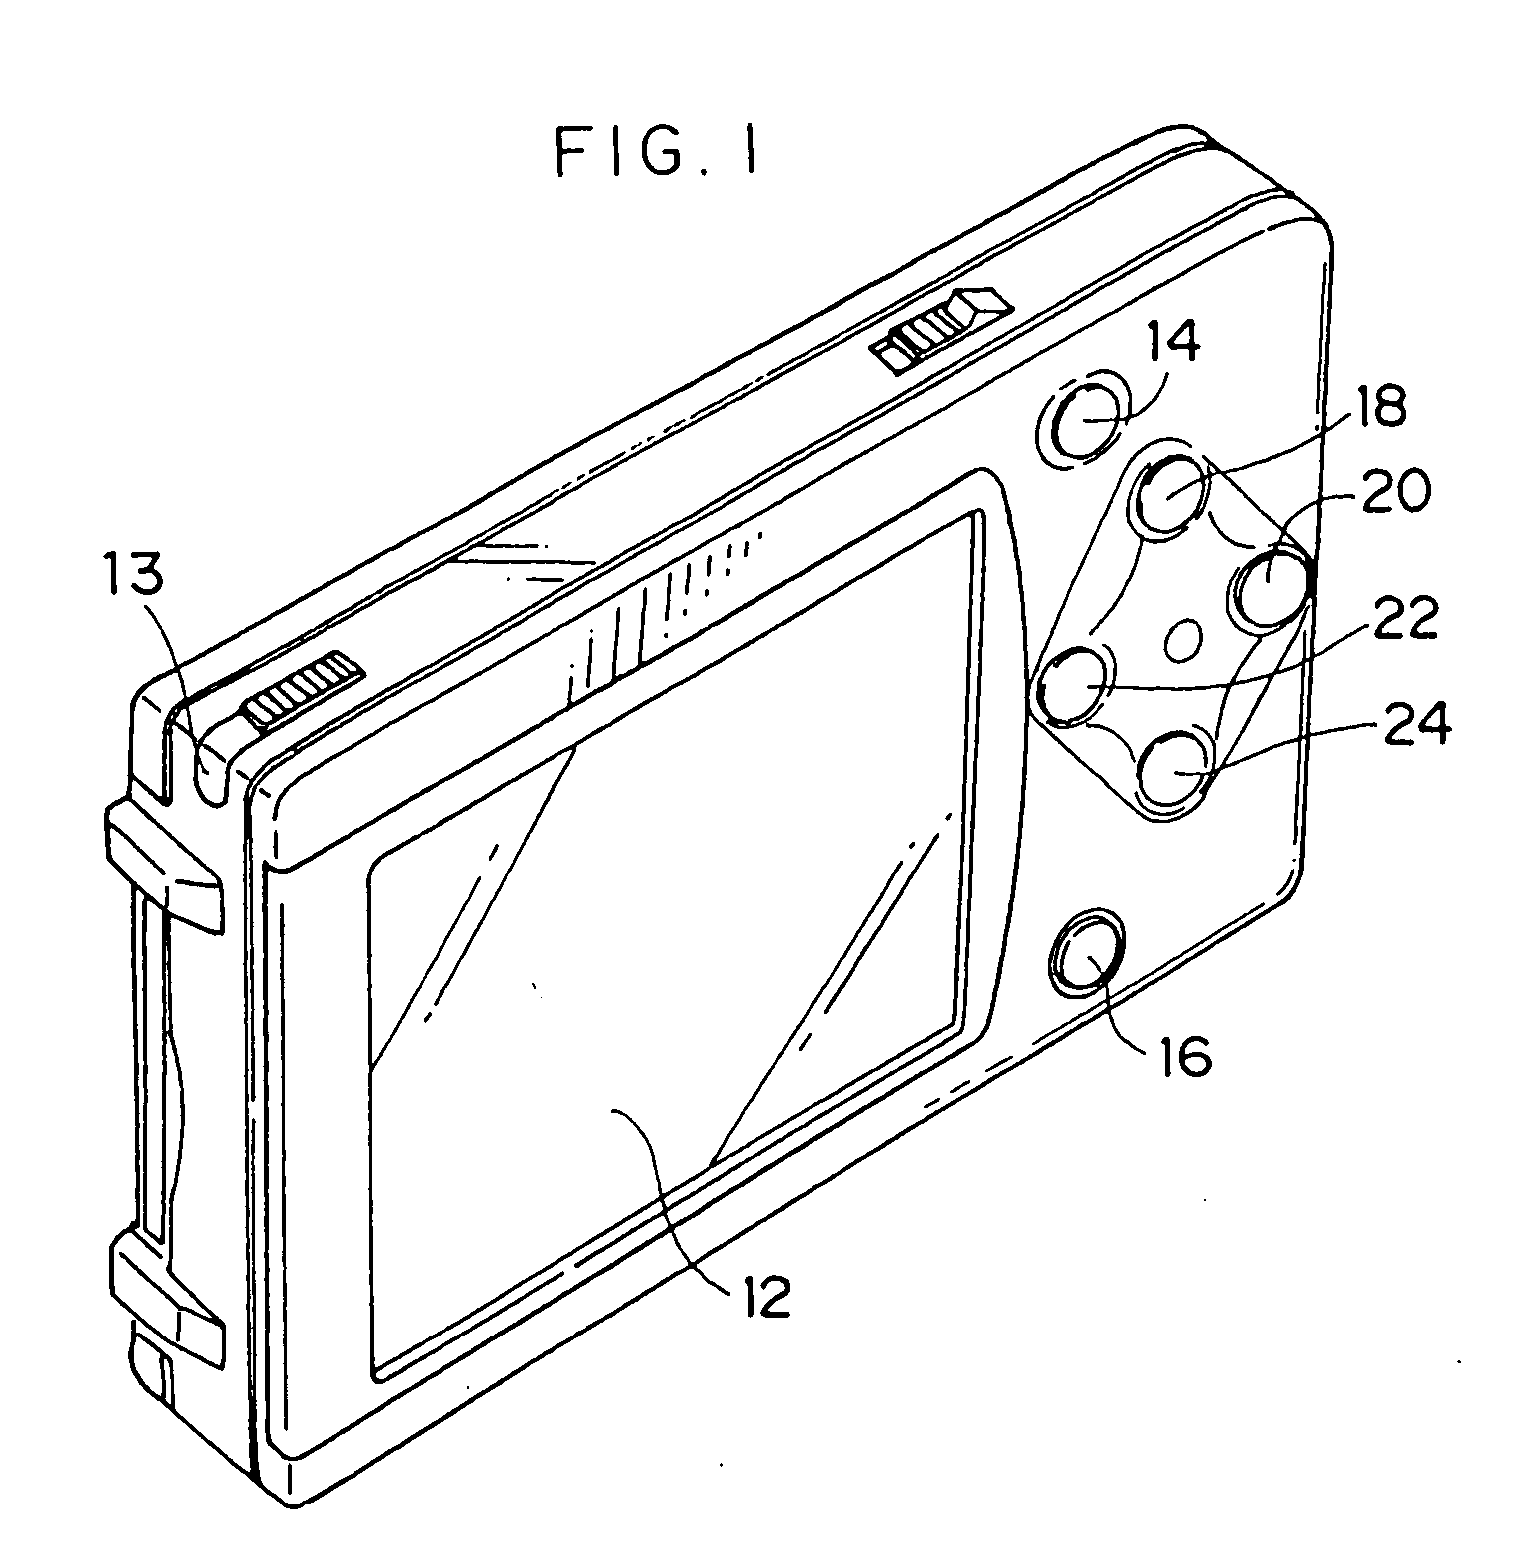 Electronic apparatus having a display function